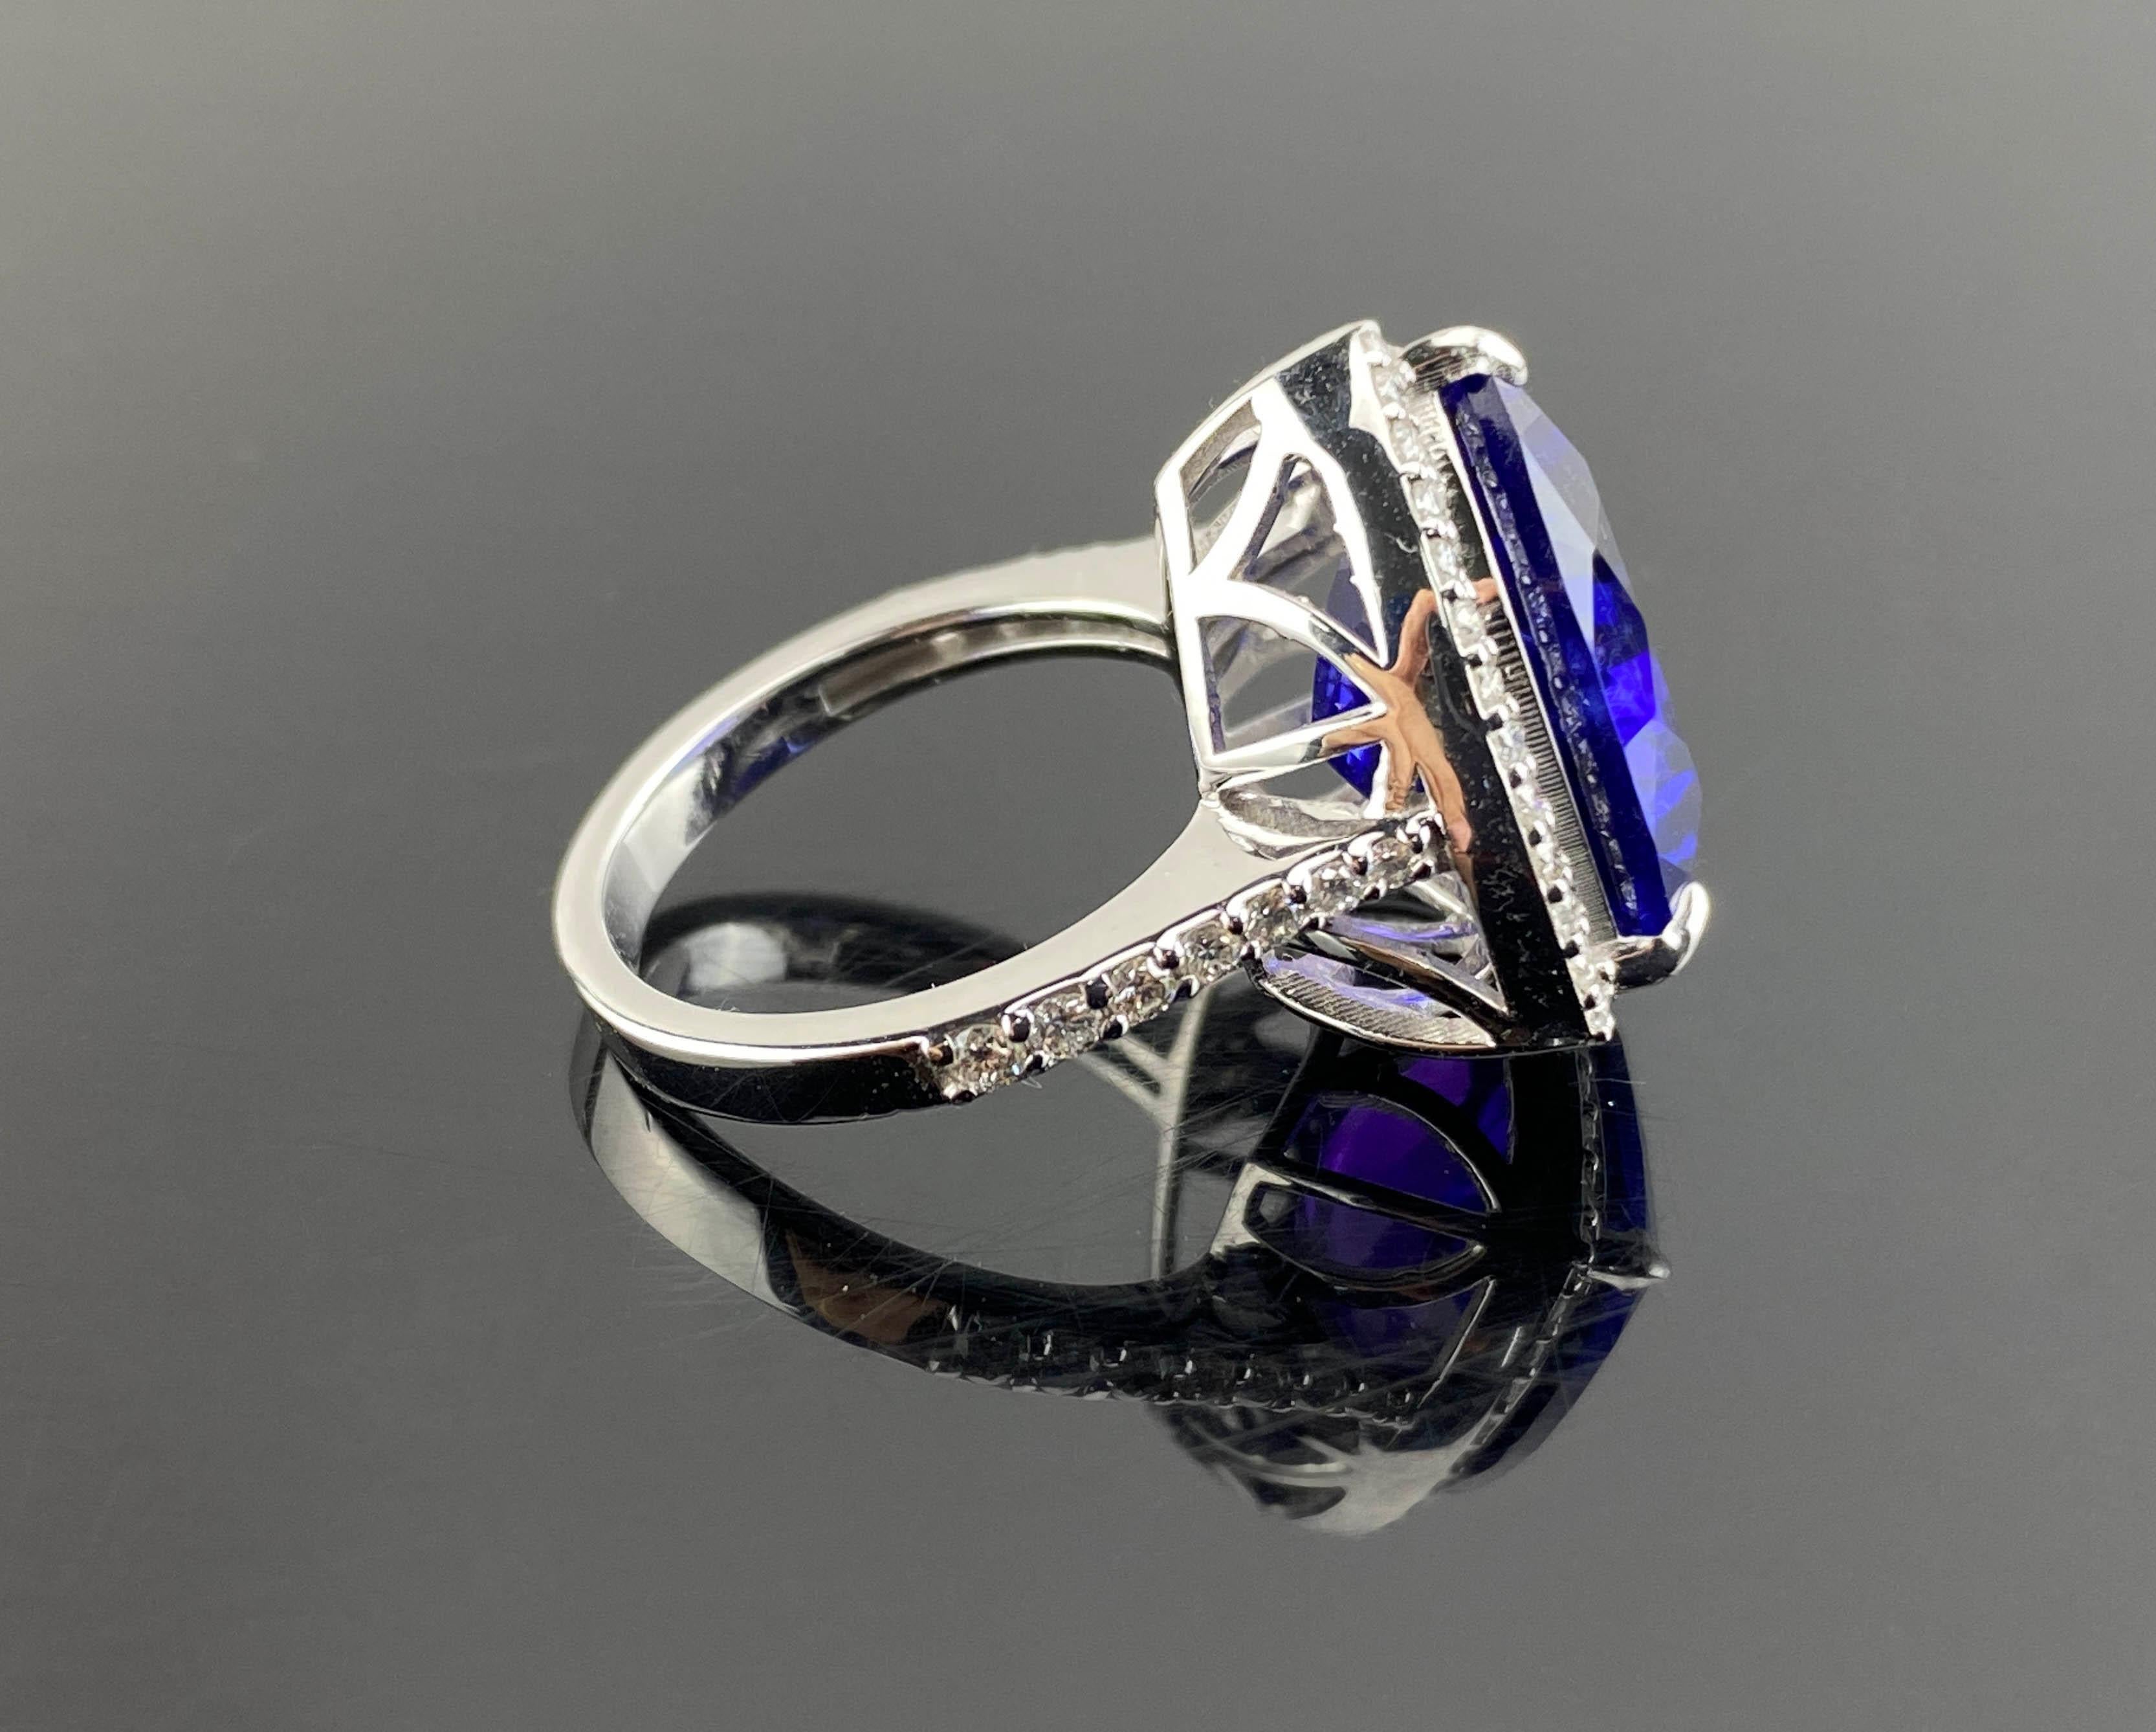 12.54 Carat Trillion Cut Tanzanite and Diamond Cocktail Ring Set in White Gold For Sale 5